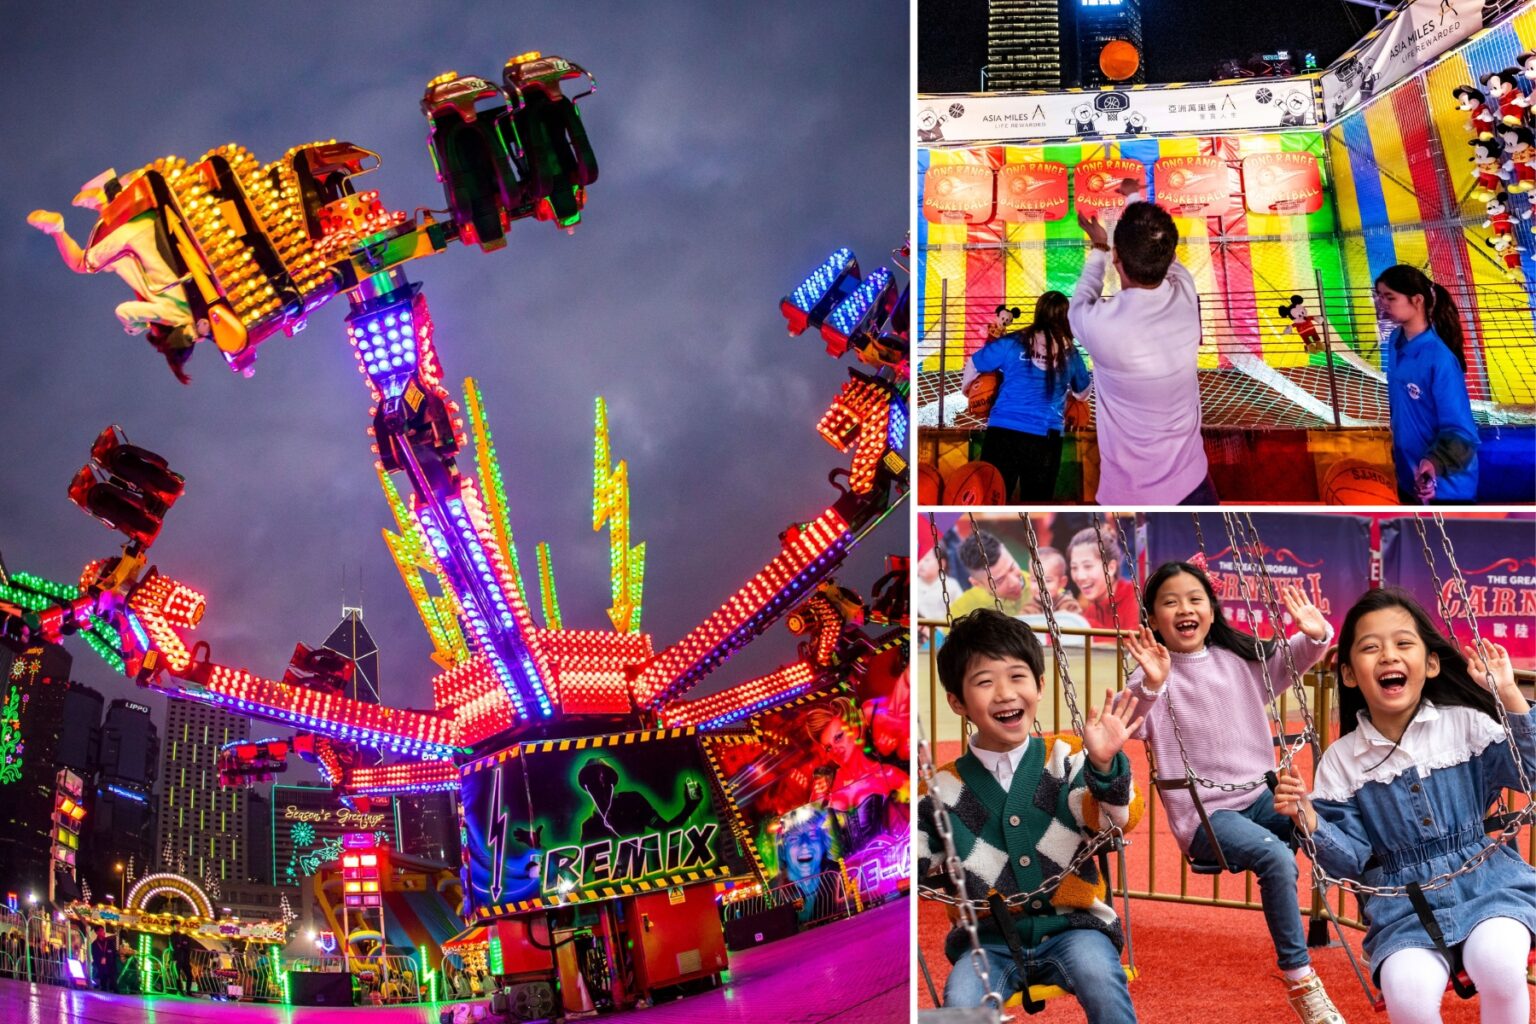 a collage showing the rides and games at the aia carnival in hong kong